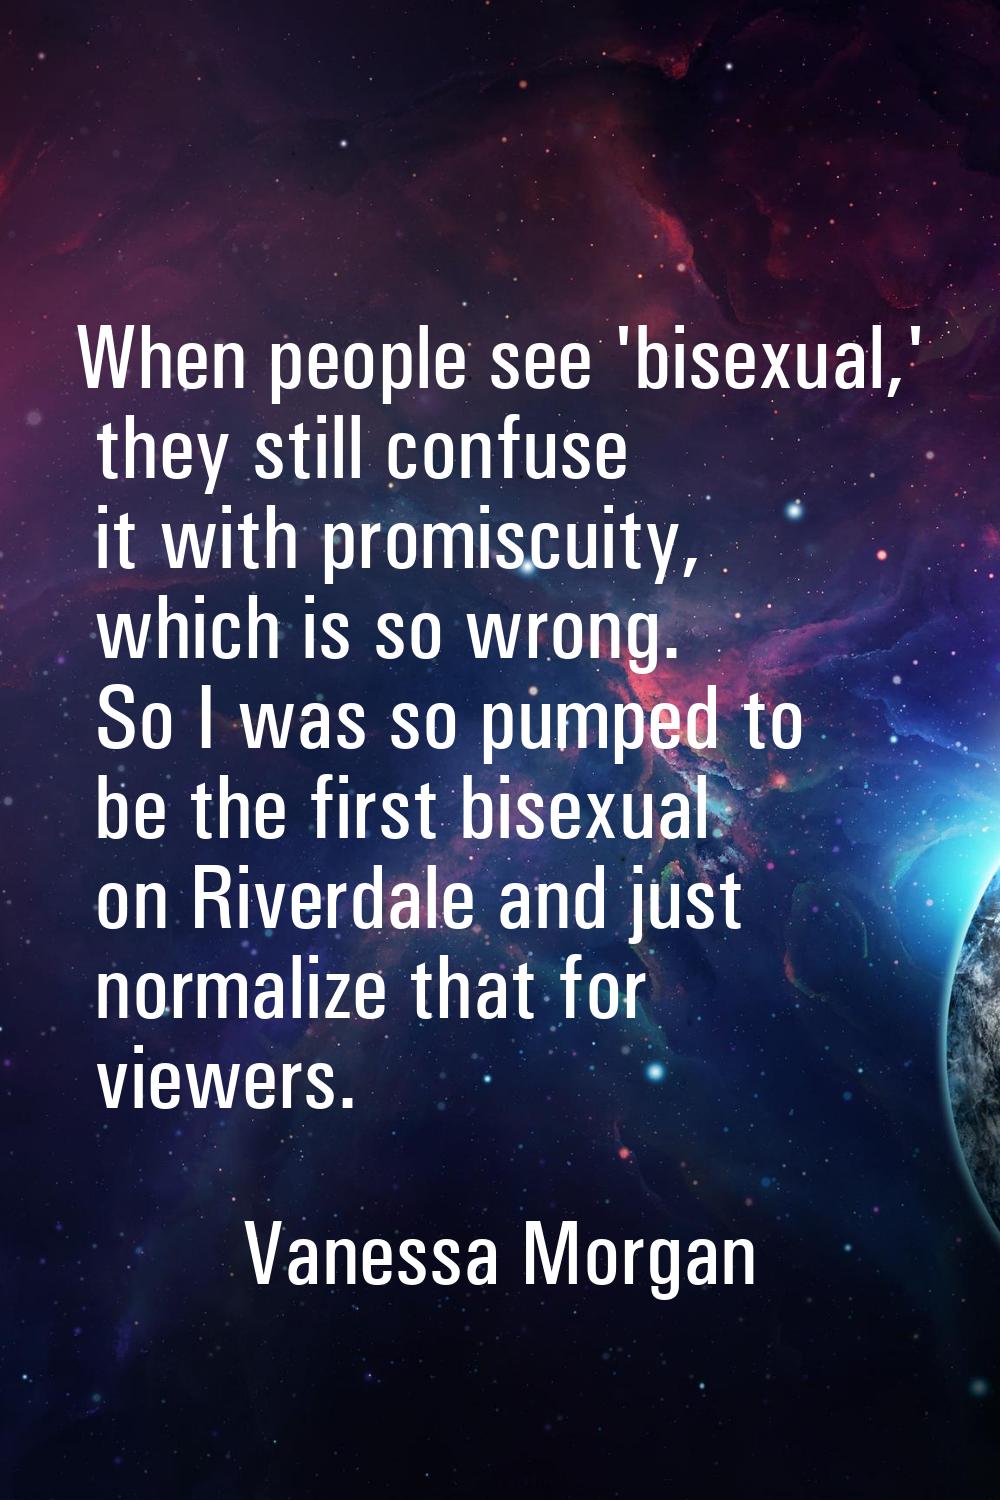 When people see 'bisexual,' they still confuse it with promiscuity, which is so wrong. So I was so 